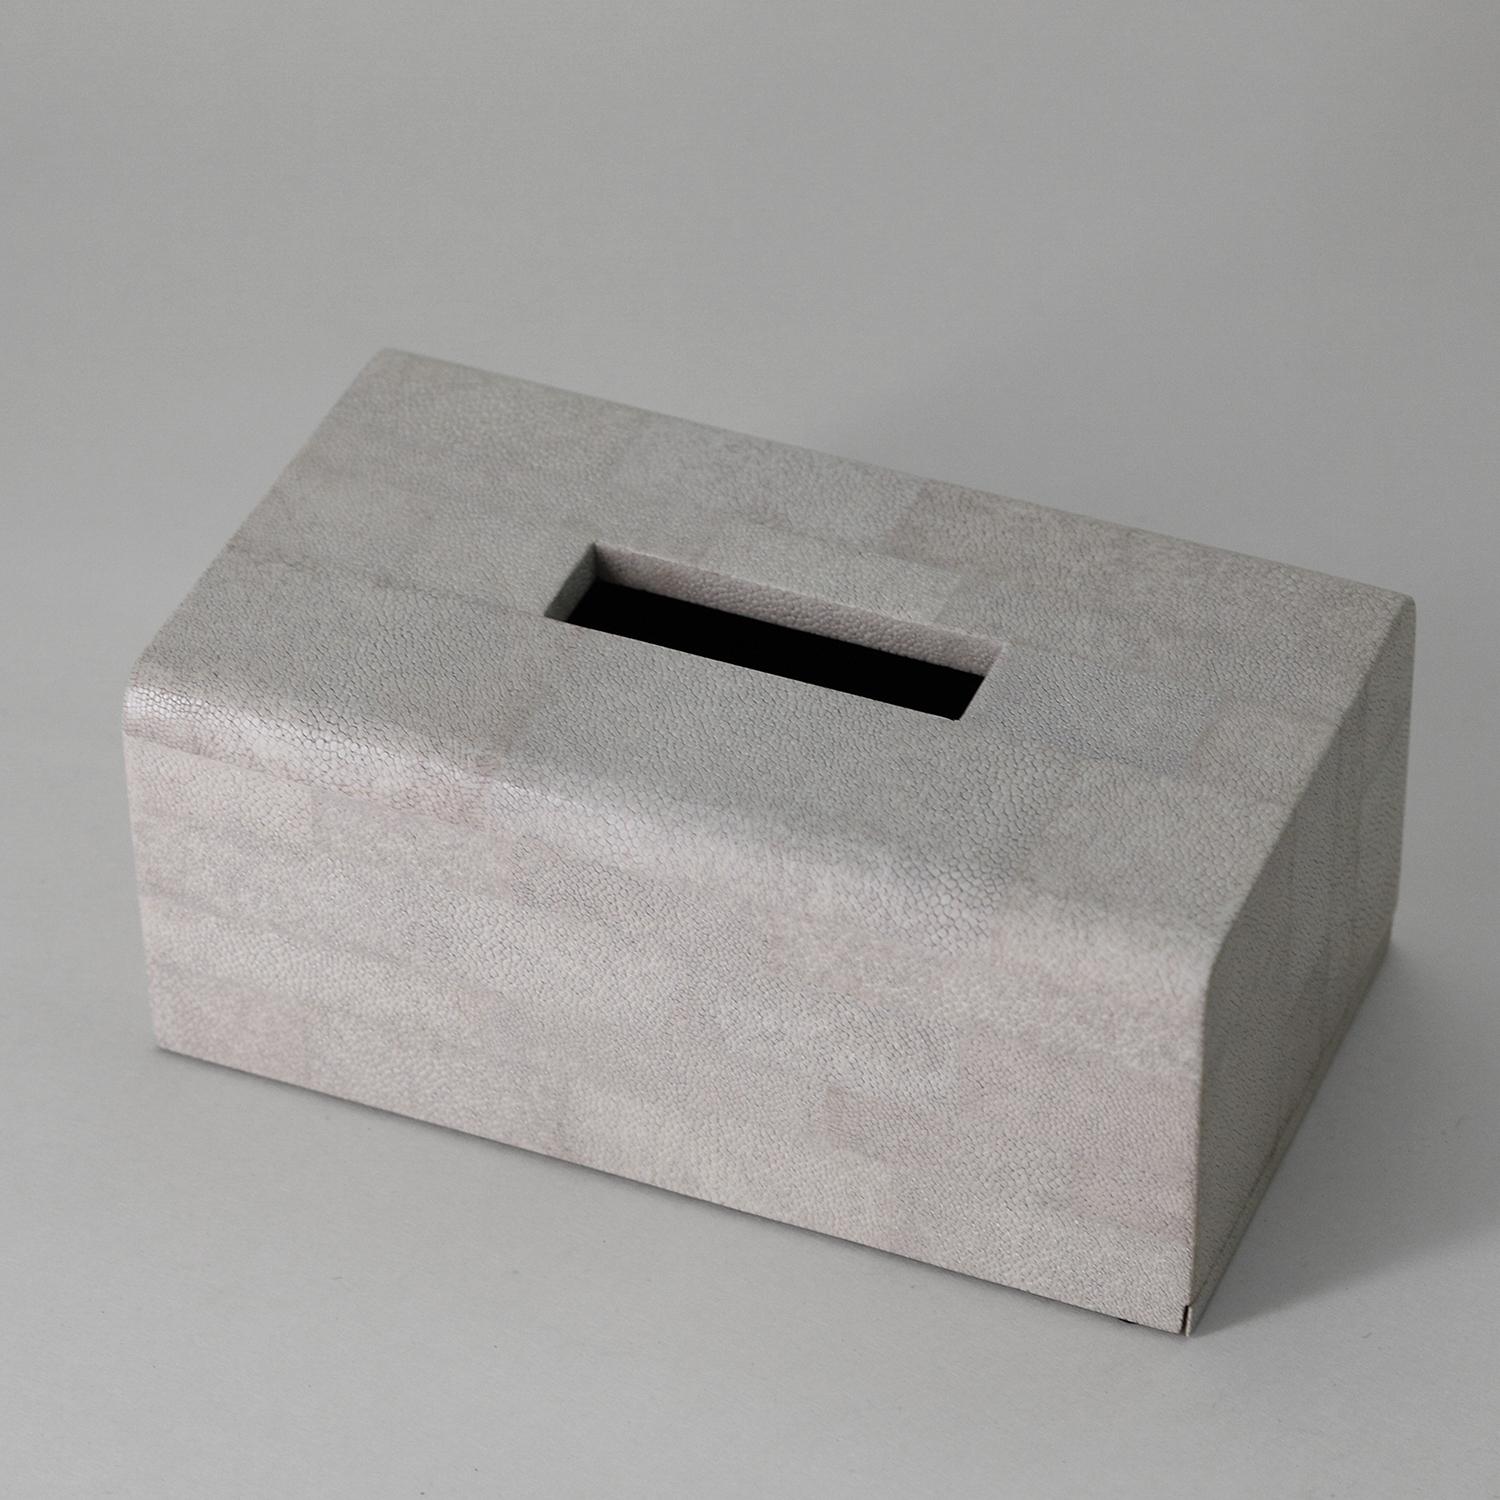 Woodwork Galuchat Shagreen Long Tissue Box in Parallel Line by Alexander Lamont For Sale